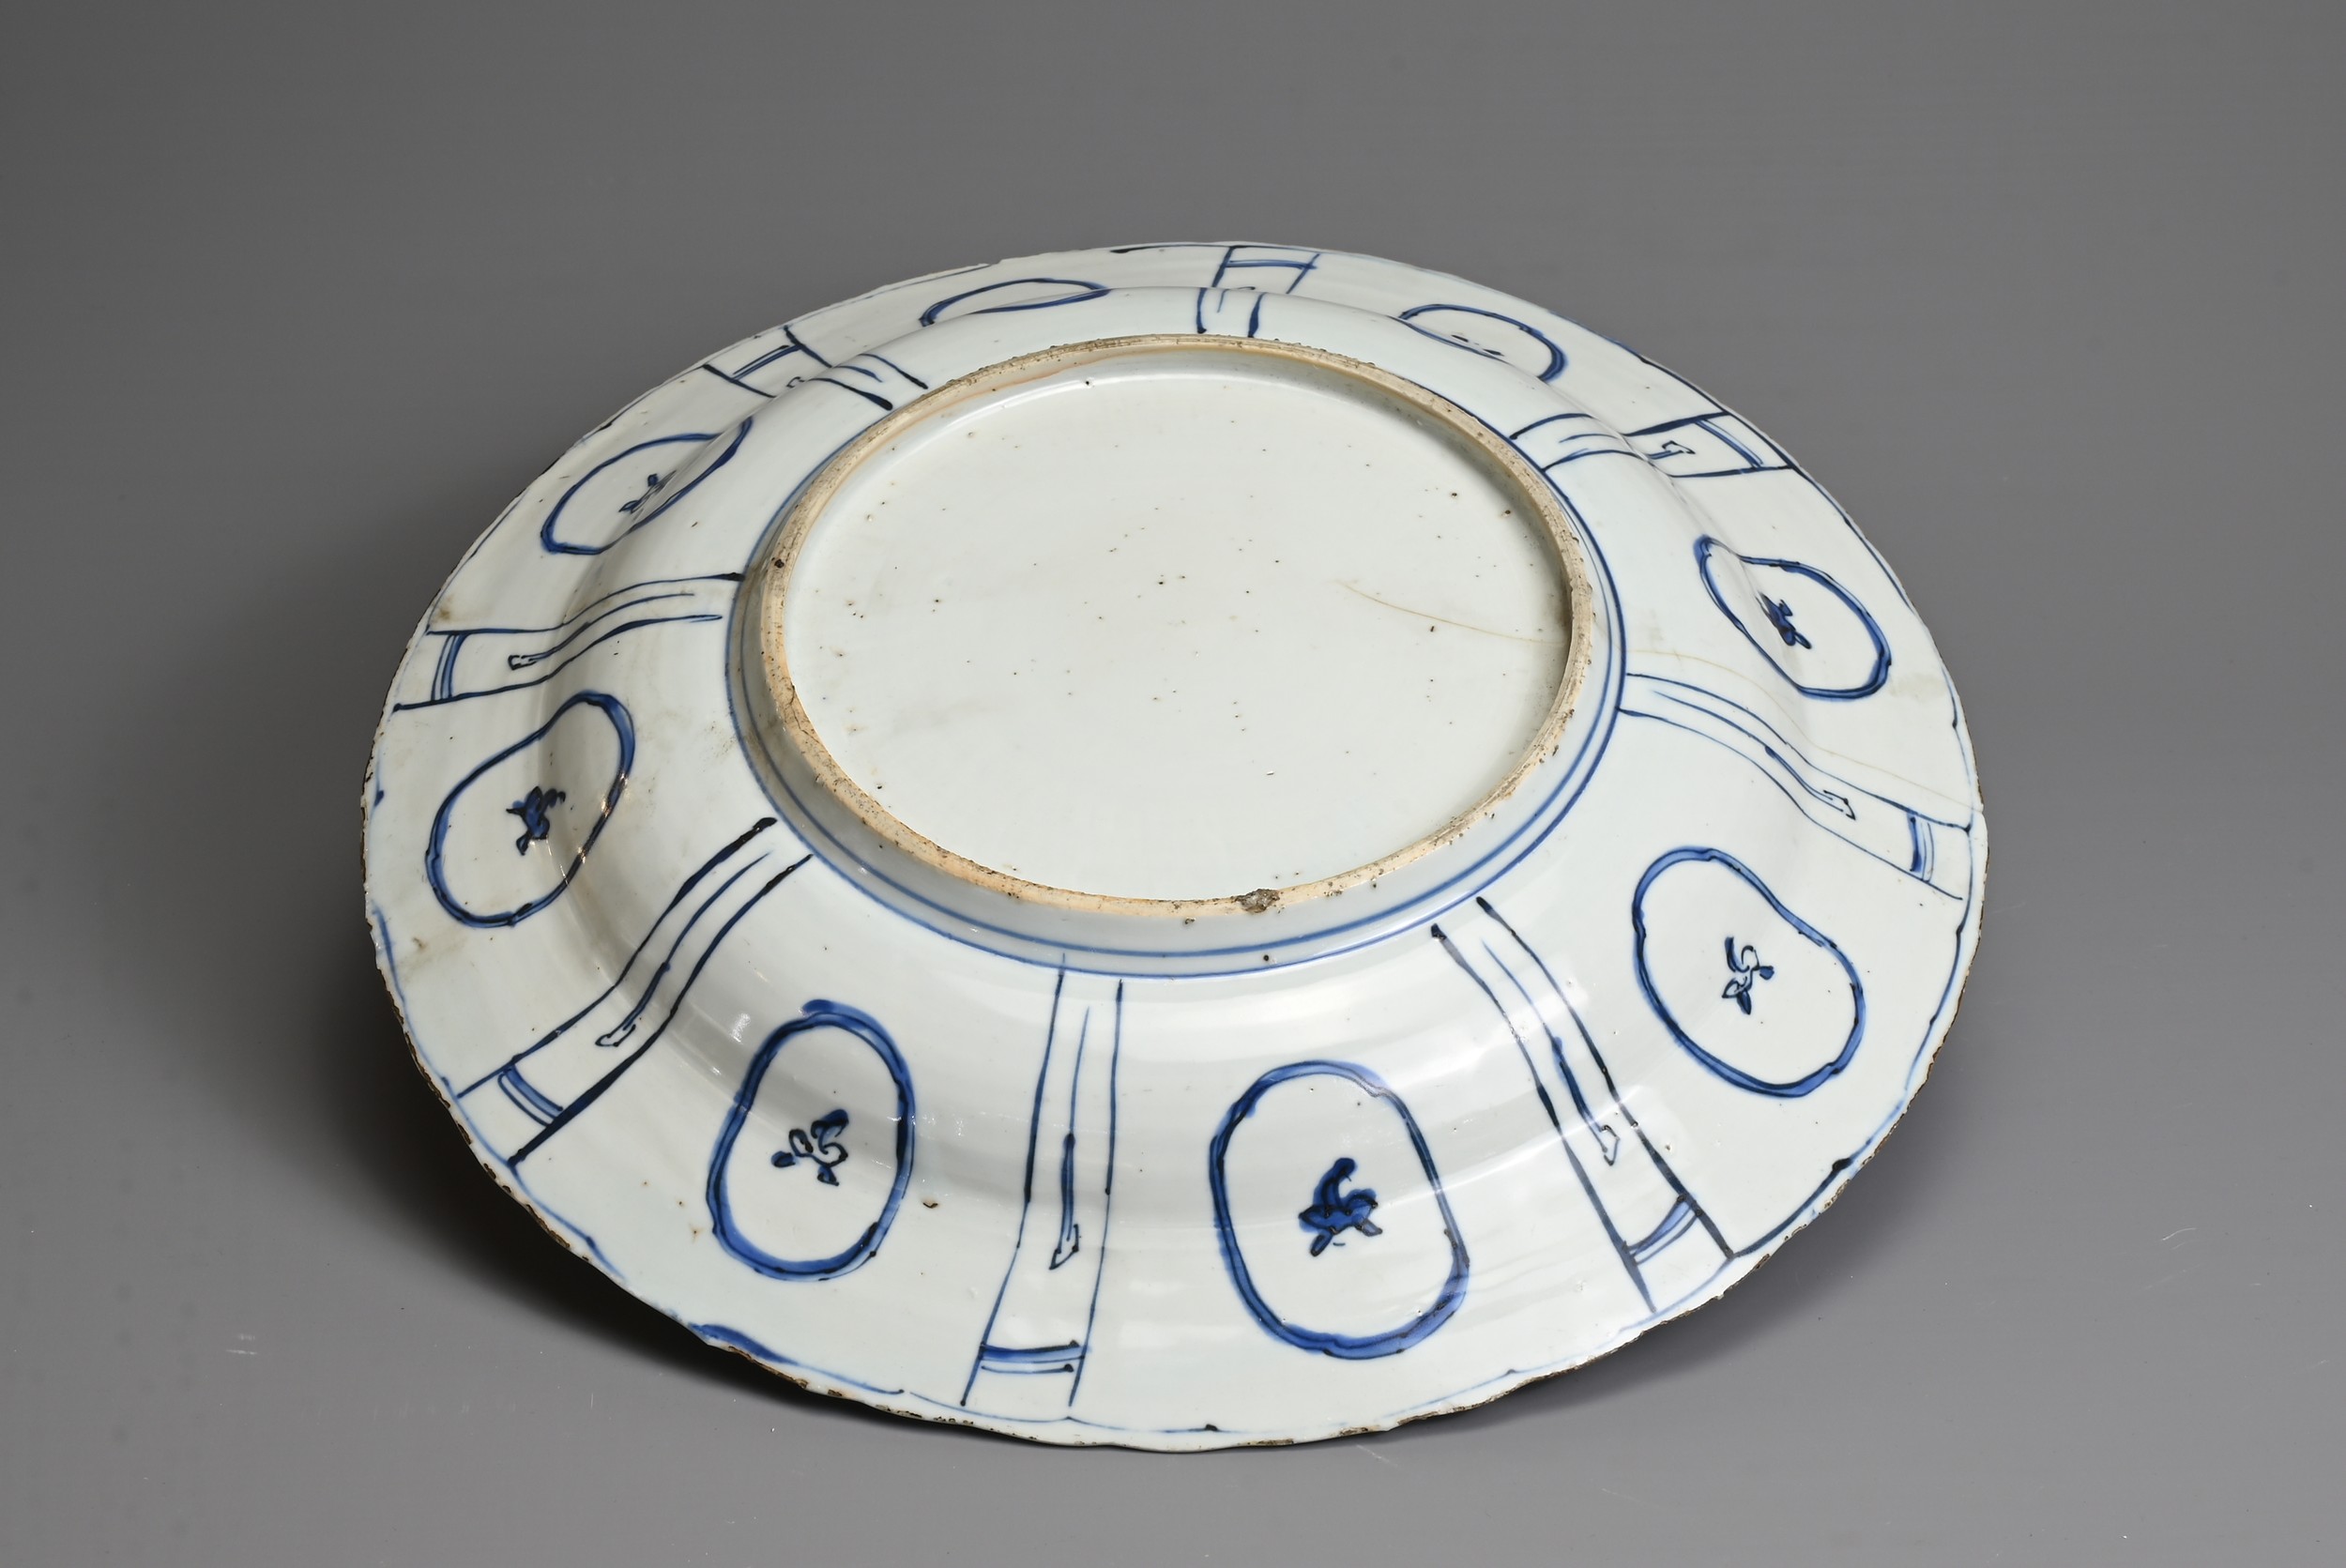 A CHINESE BLUE AND WHITE PORCELAIN KRAAK DISH, MING DYNASTY. Decorated with ducks at a lotus pond - Image 3 of 6